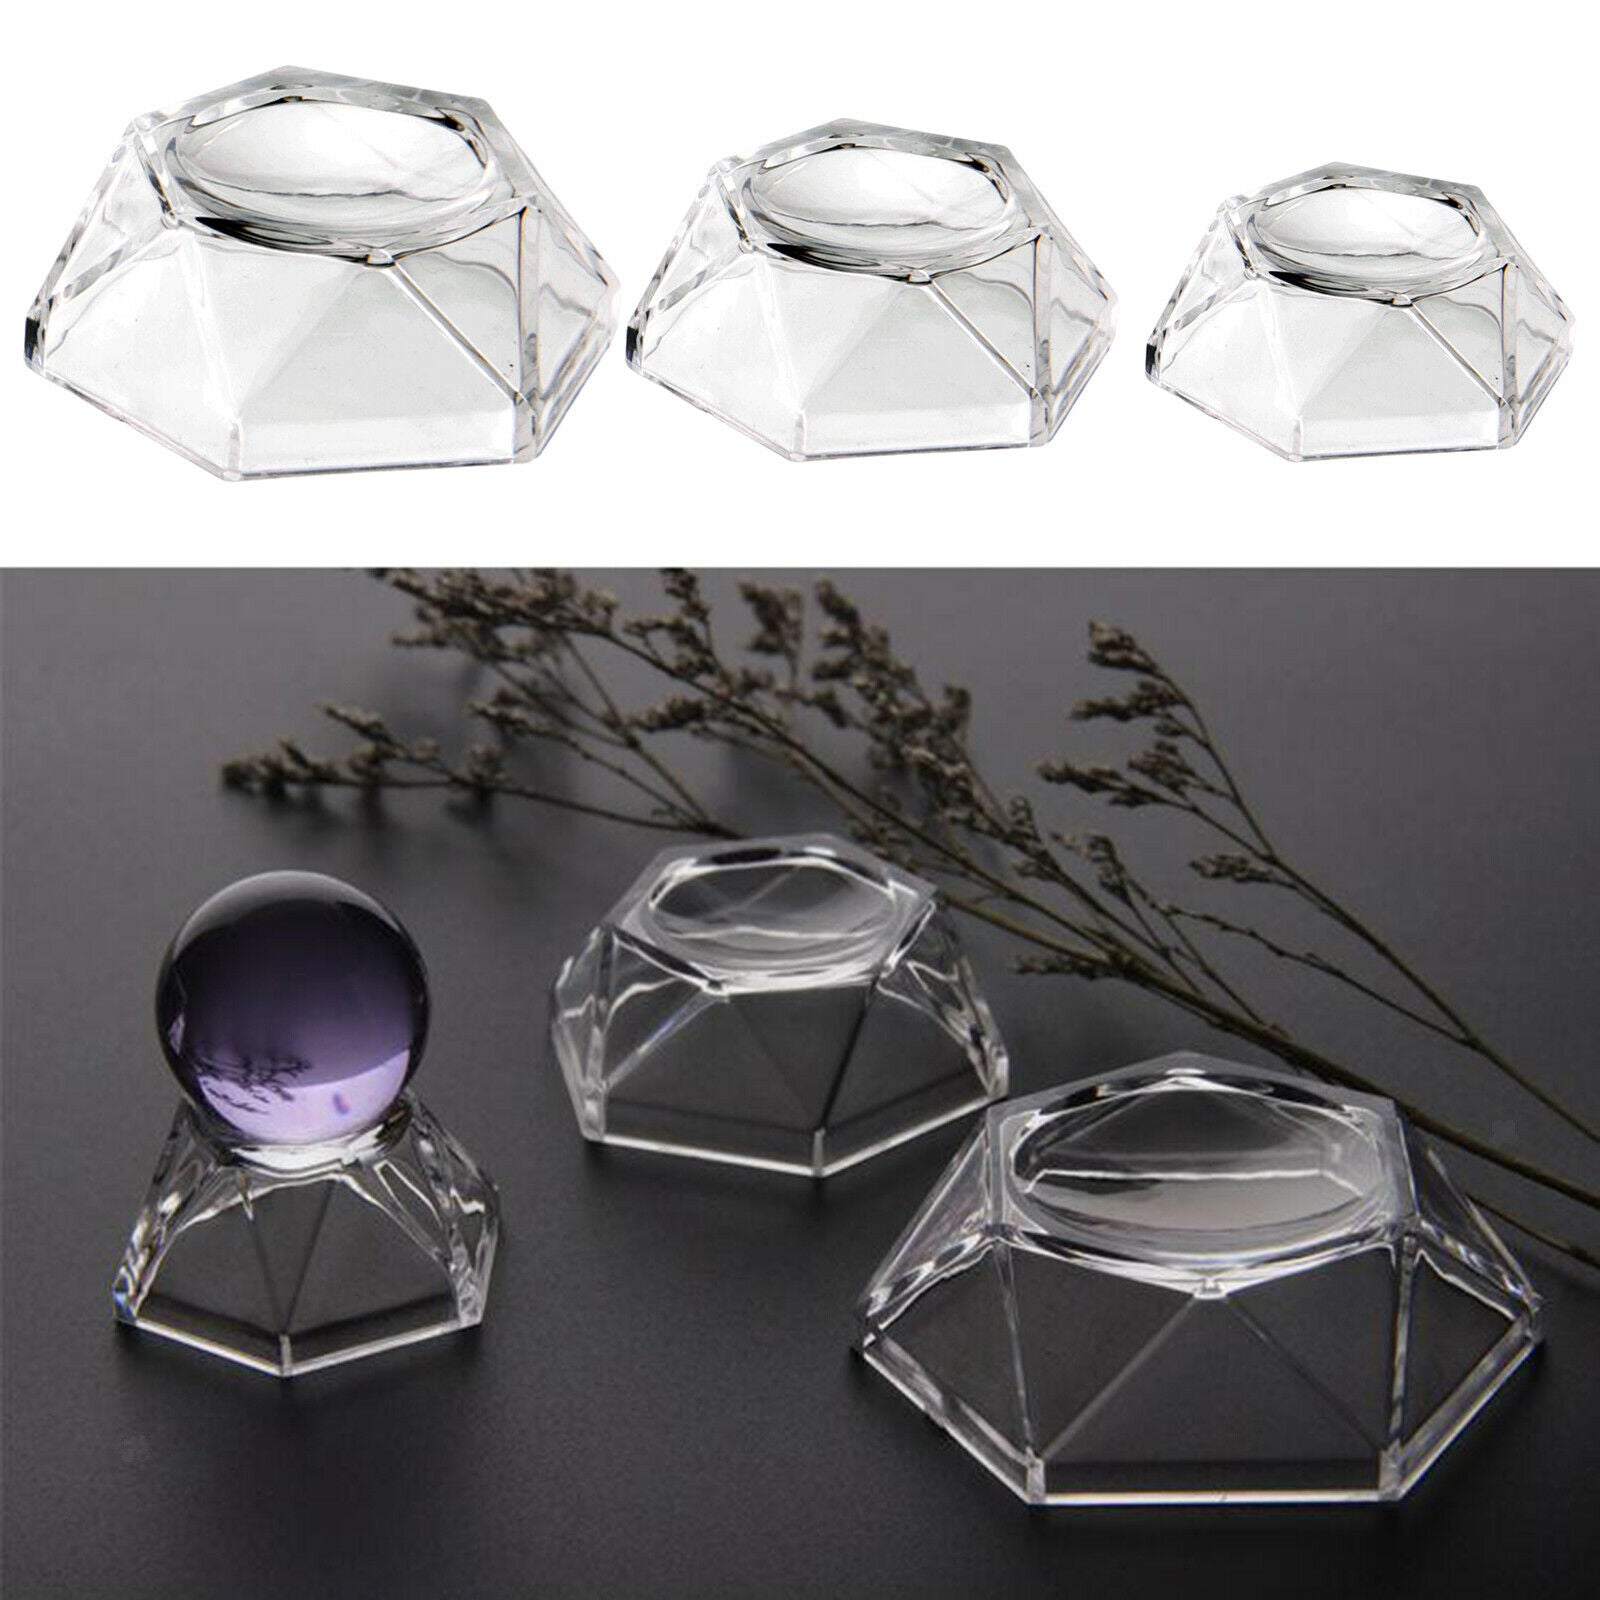 Acrylic Clear DIY Display Stand For Crystal Ball Quartz Marbles Sphere Gems Eggs